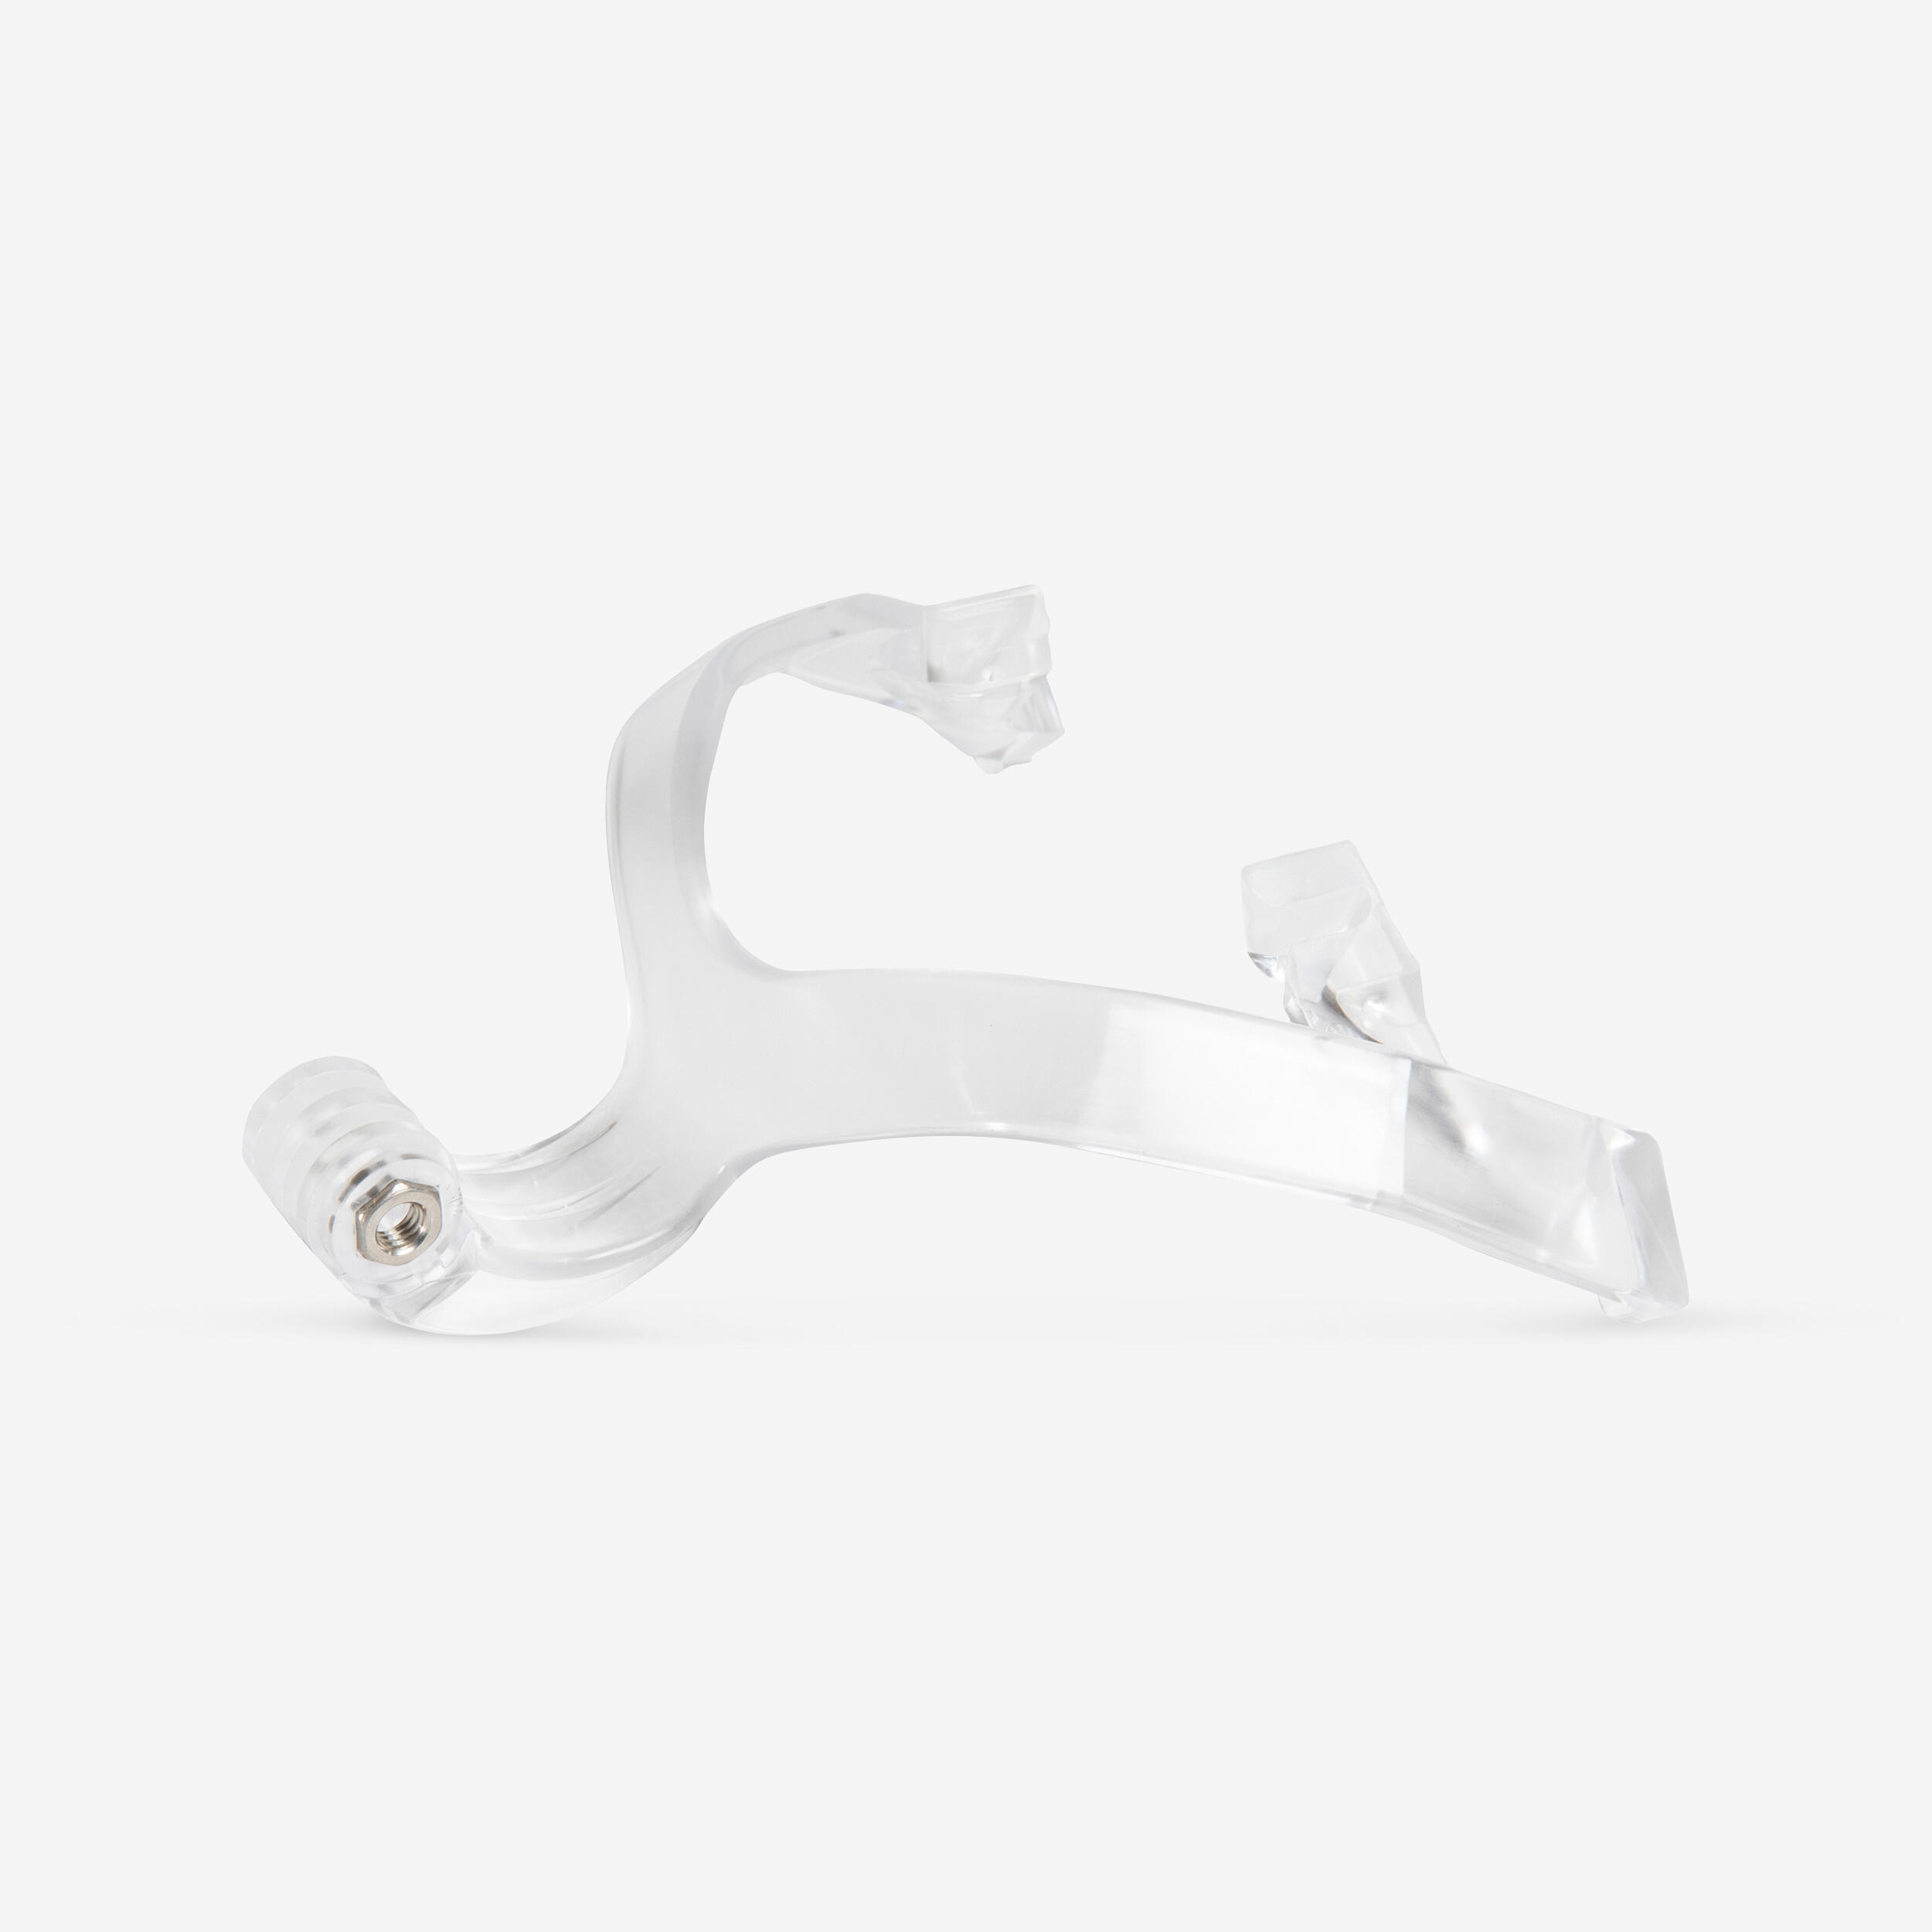 Camera mount for the Easybreath Snorkelling mask 1/3